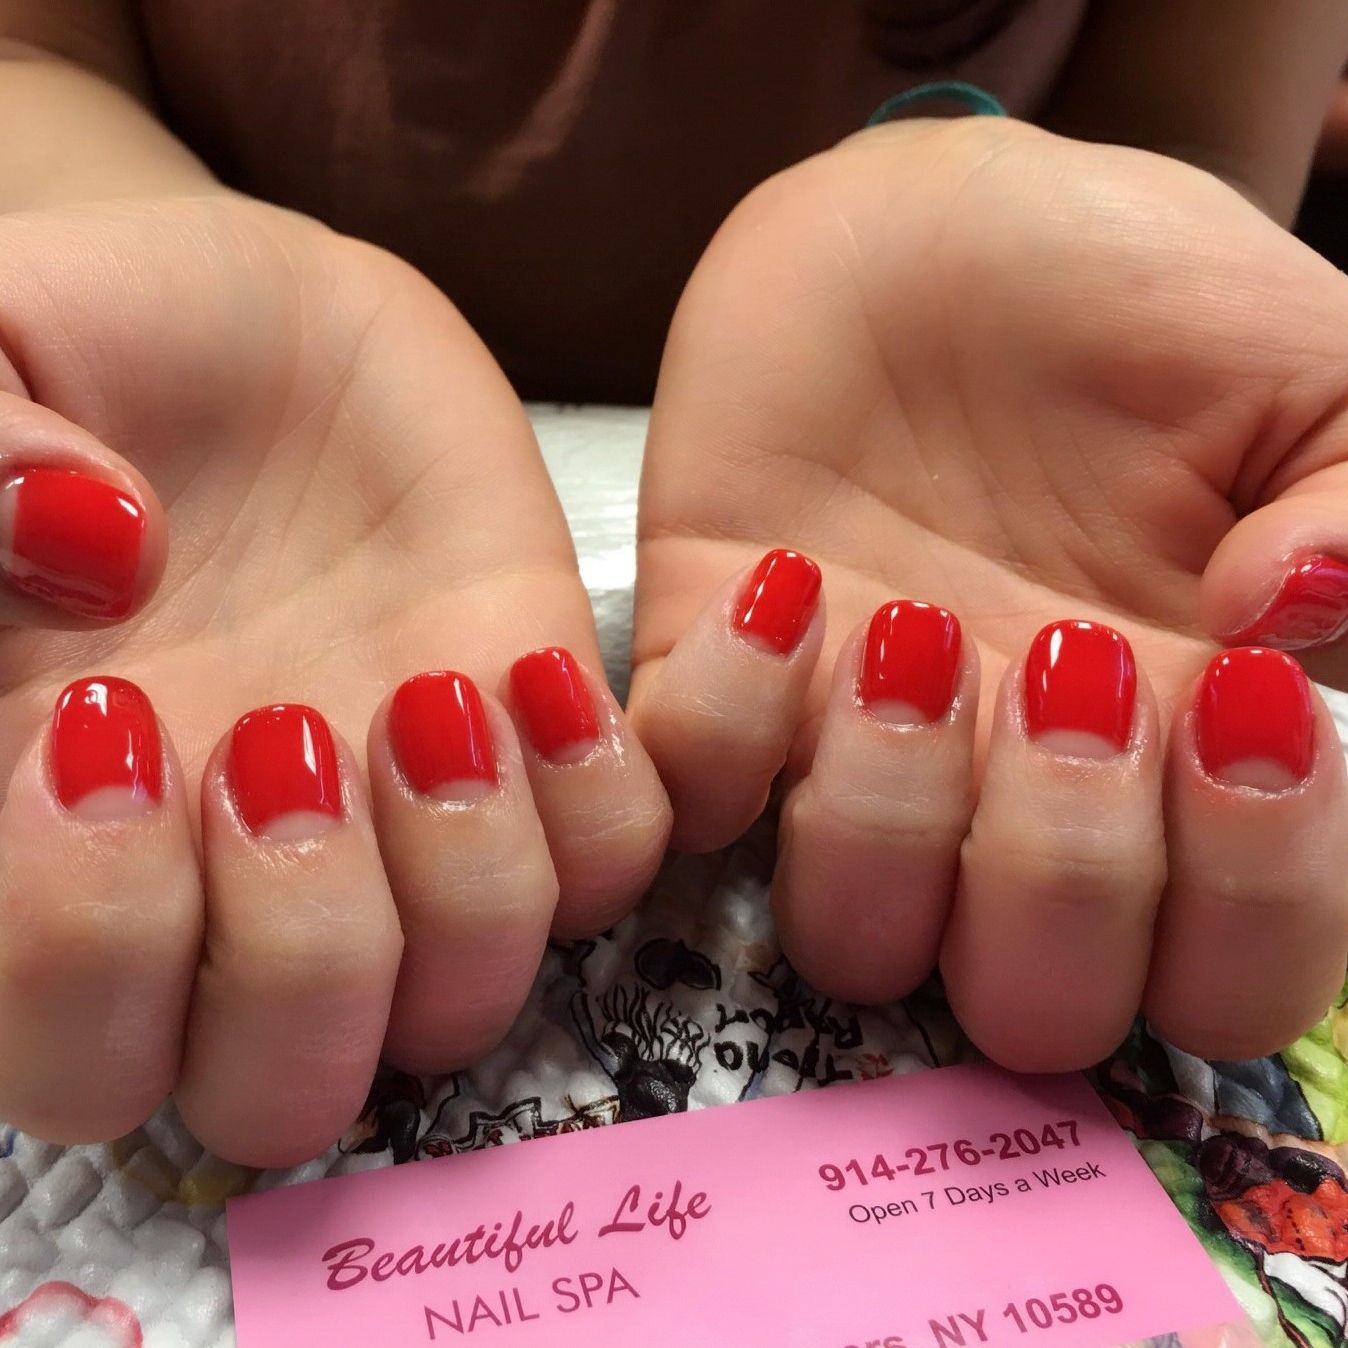 Pedicure in Somers, New York